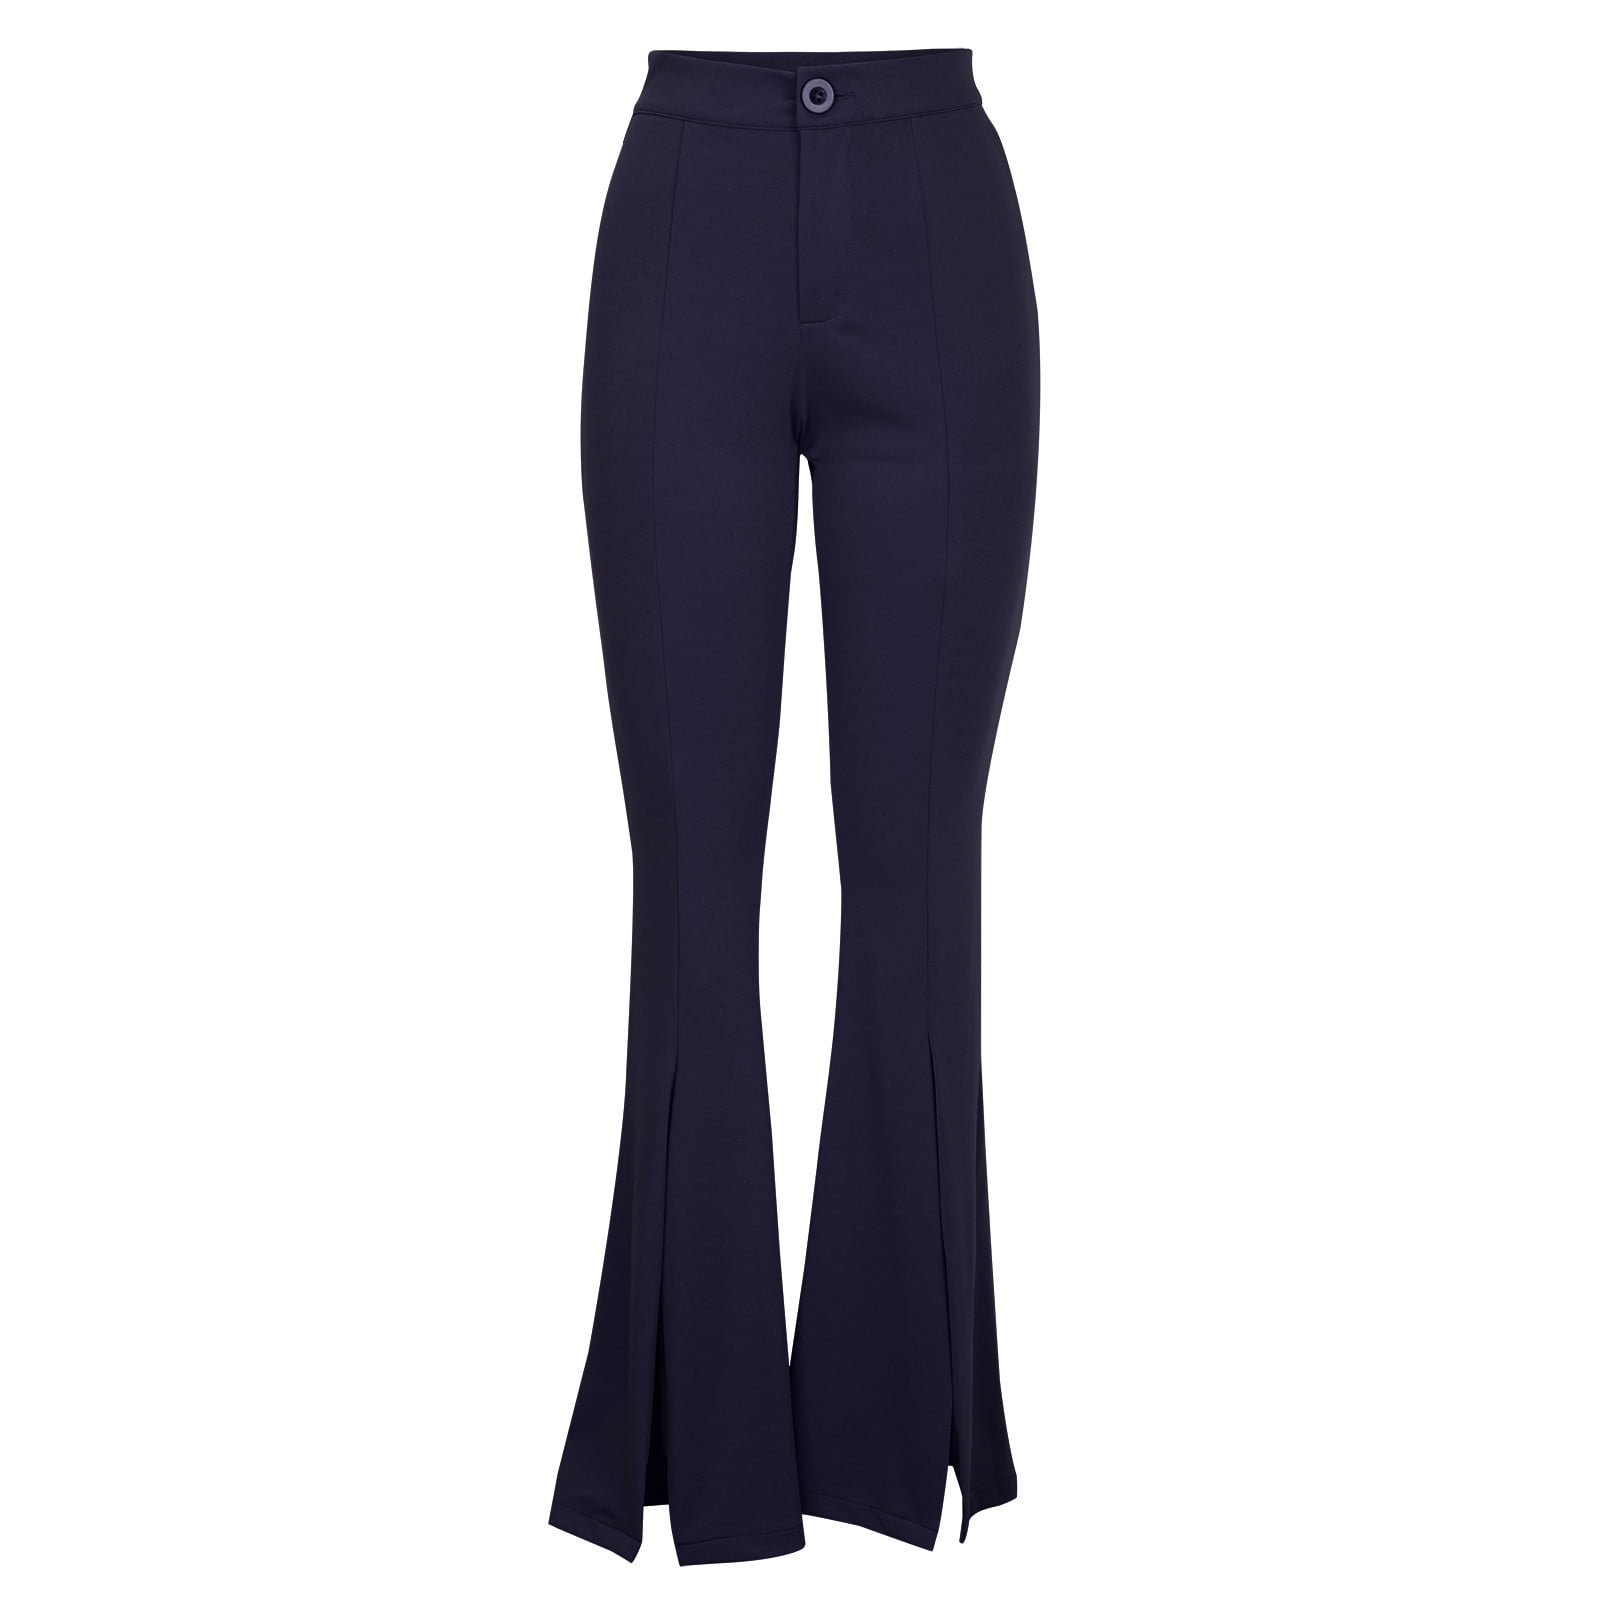 Depvin Lifestyle-Women Bell Bottom Retro-Chic High-Waisted Trouser Pants.  at Rs 199/piece, Ladies Bottom Wear in Surat